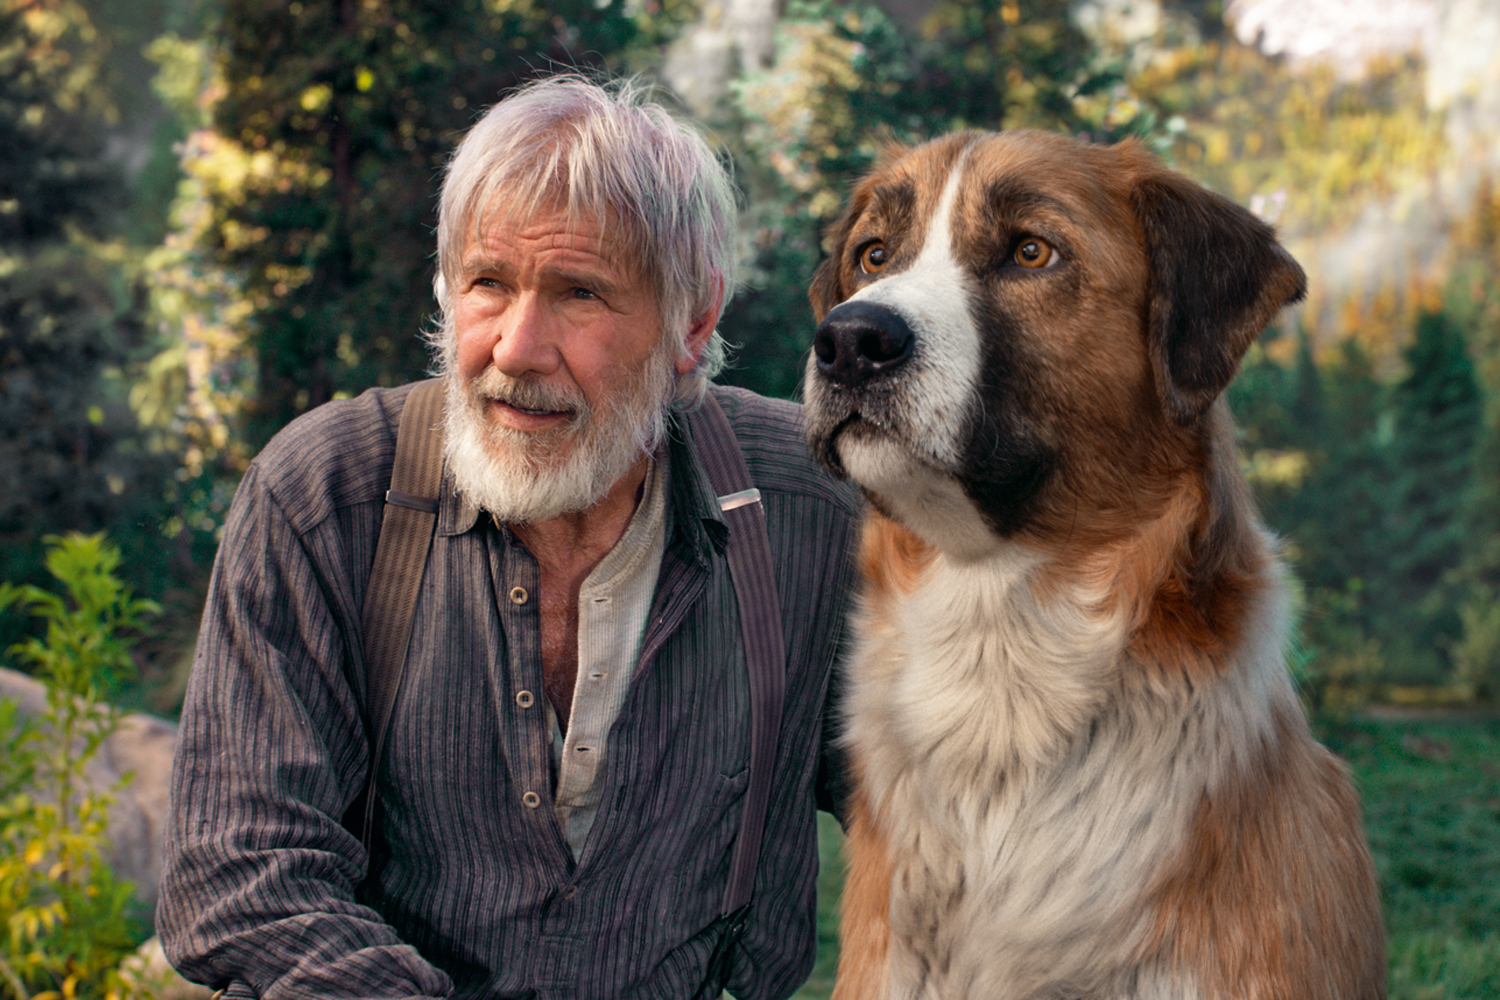 Harrison Ford on his new movie Call of the Wild | Movies, Kids | Time